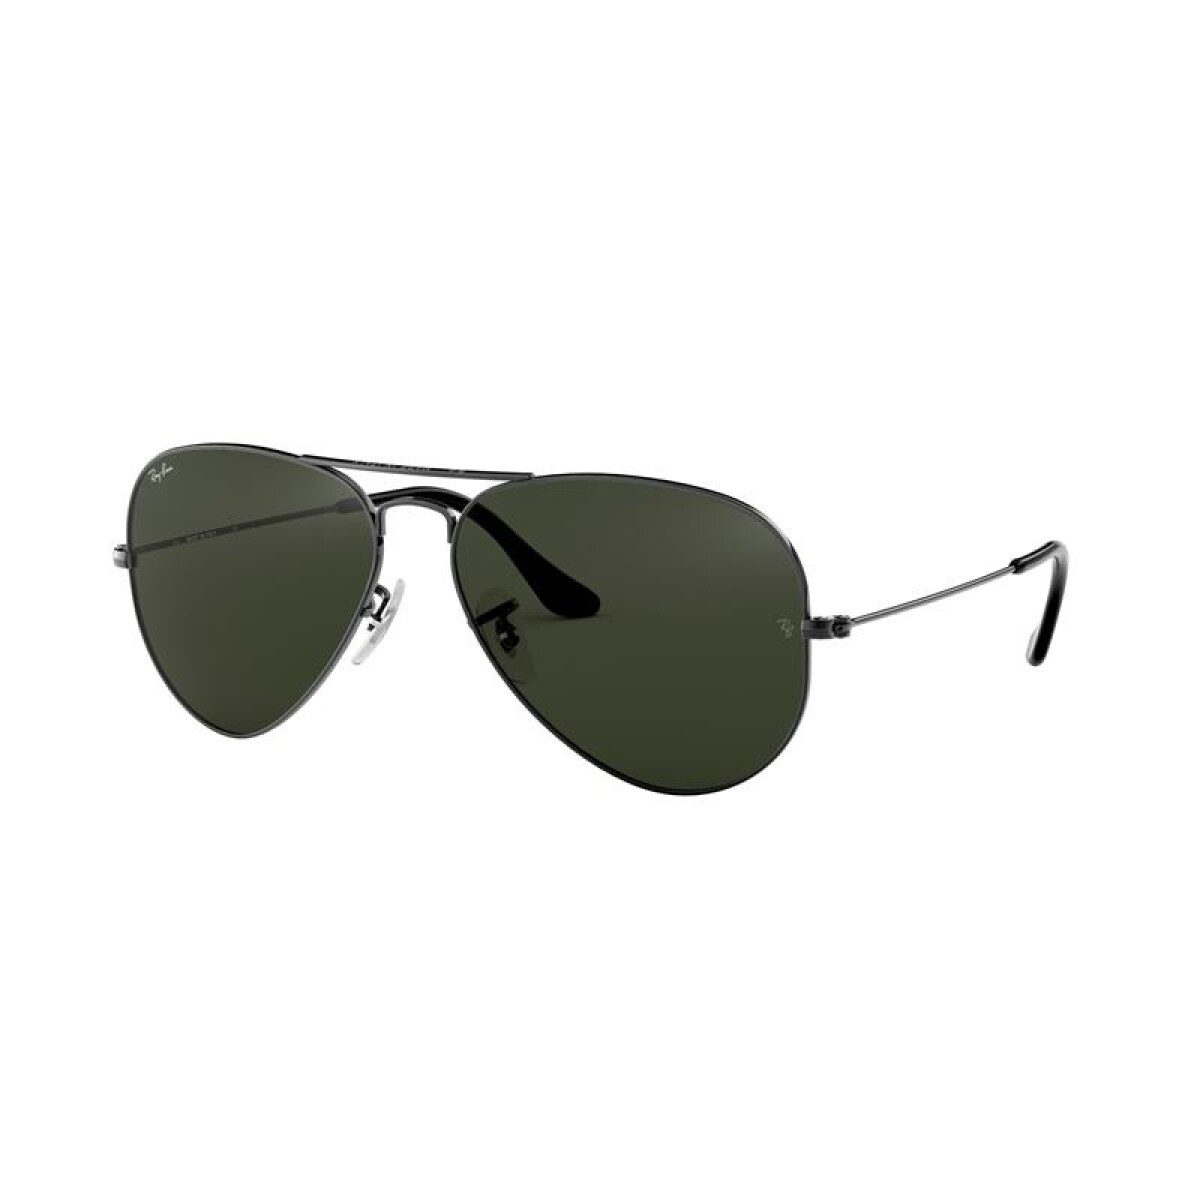 Ray Ban Rb3025 - W0879 